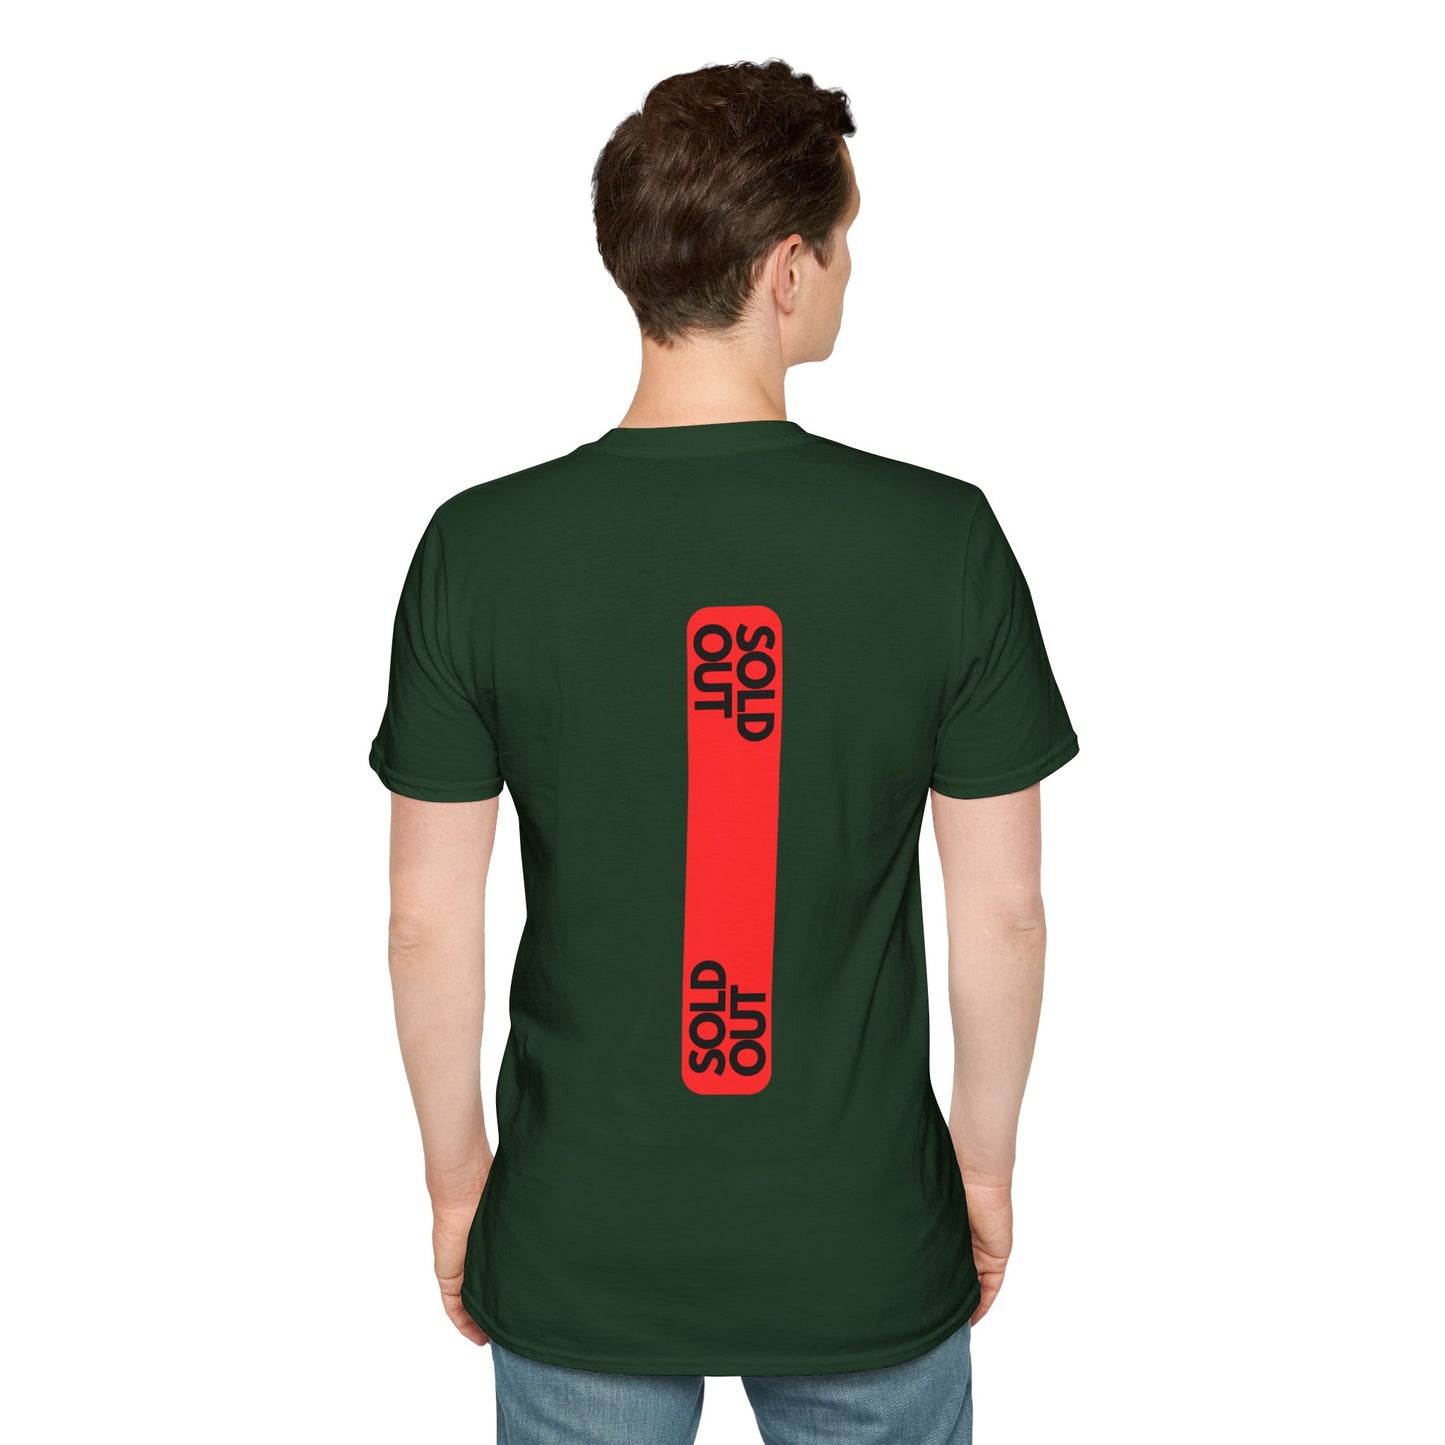 Green T-shirt with a striking red tag design and the text ‘SOLD OUT’ in bold letters